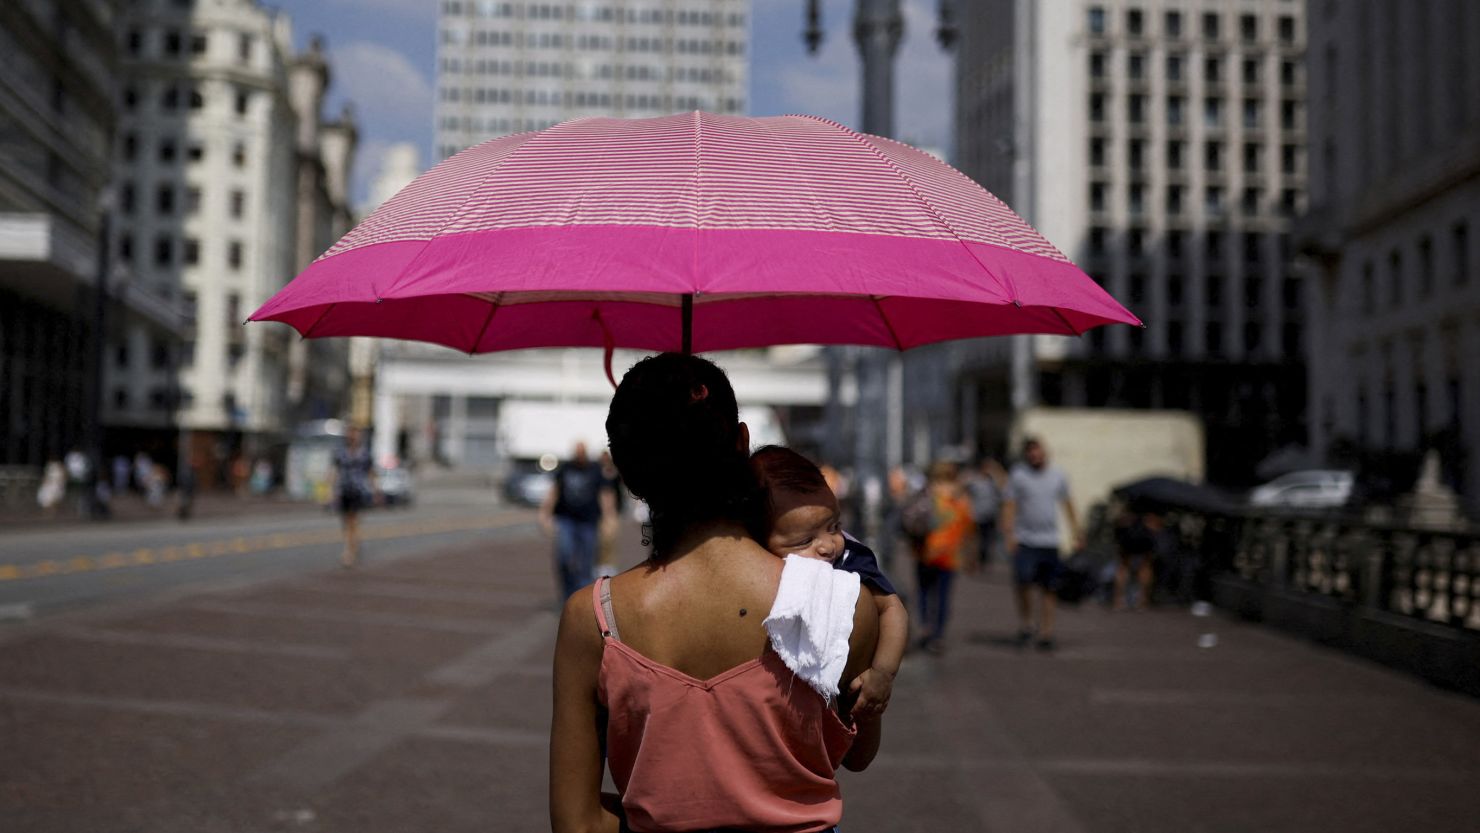 Anelise de Jesus holds her 2-month-old son João, as they shelter from the sun under an umbrella in São Paulo, Brazil on September 22, 2023.